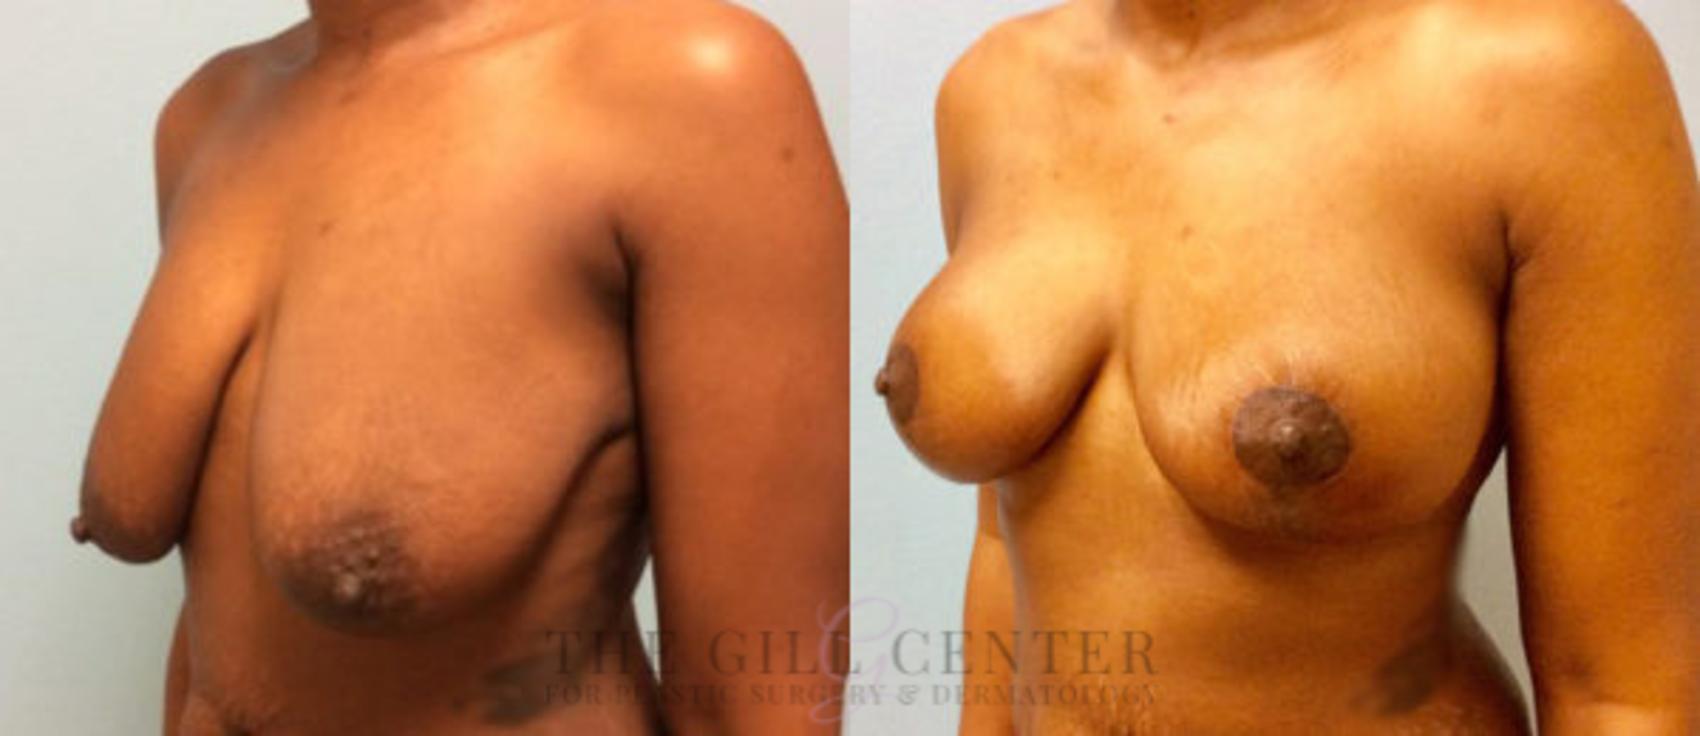 Breast Lift Case 78 Before & After Left Oblique | The Woodlands, TX | The Gill Center for Plastic Surgery and Dermatology